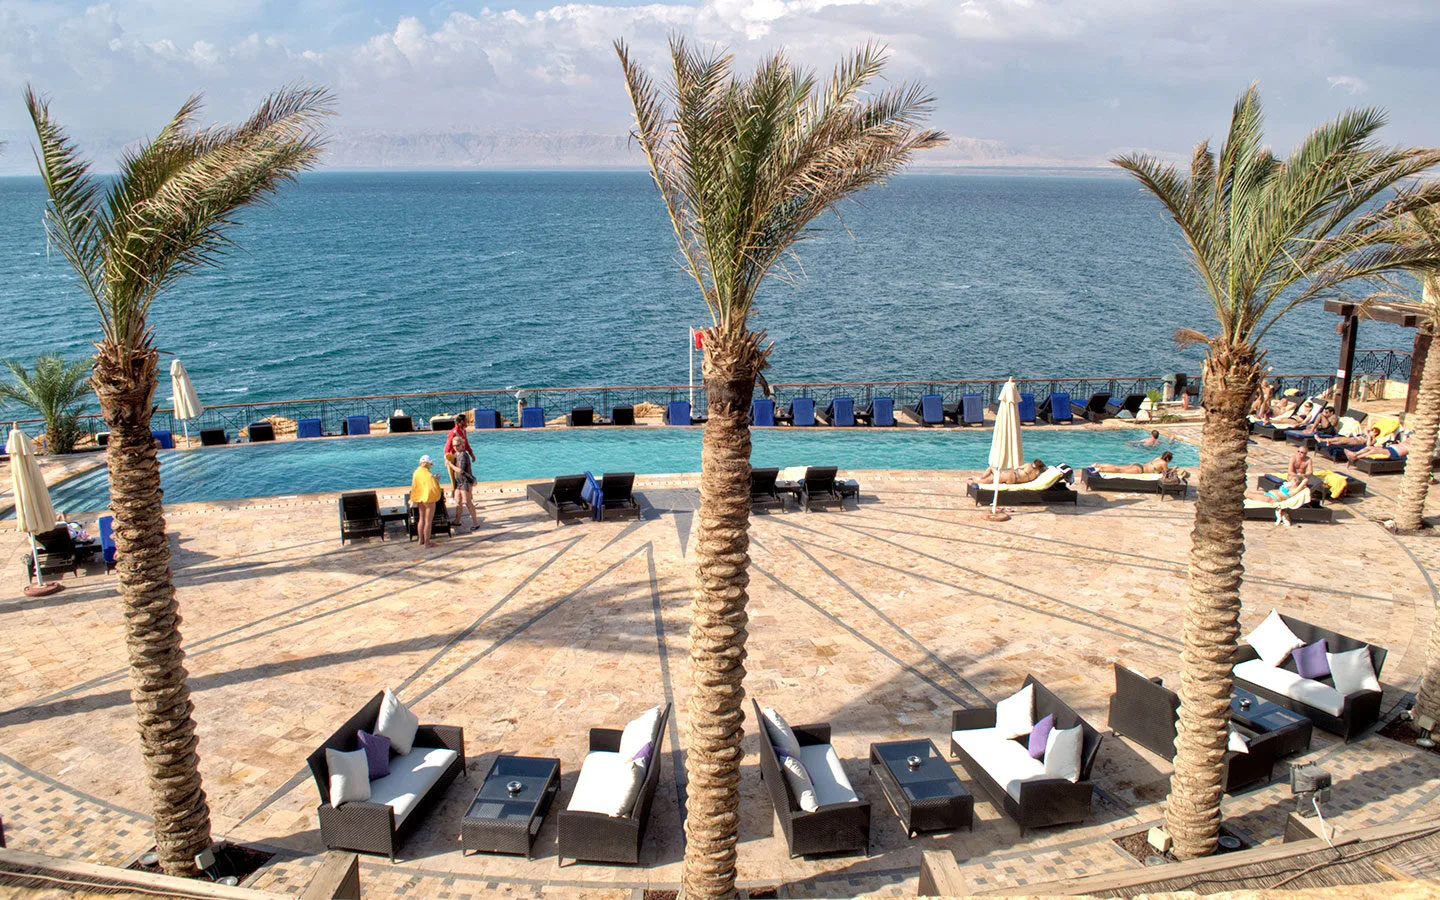 Relaxing by the Dead Sea at the Mövenpick Hotel